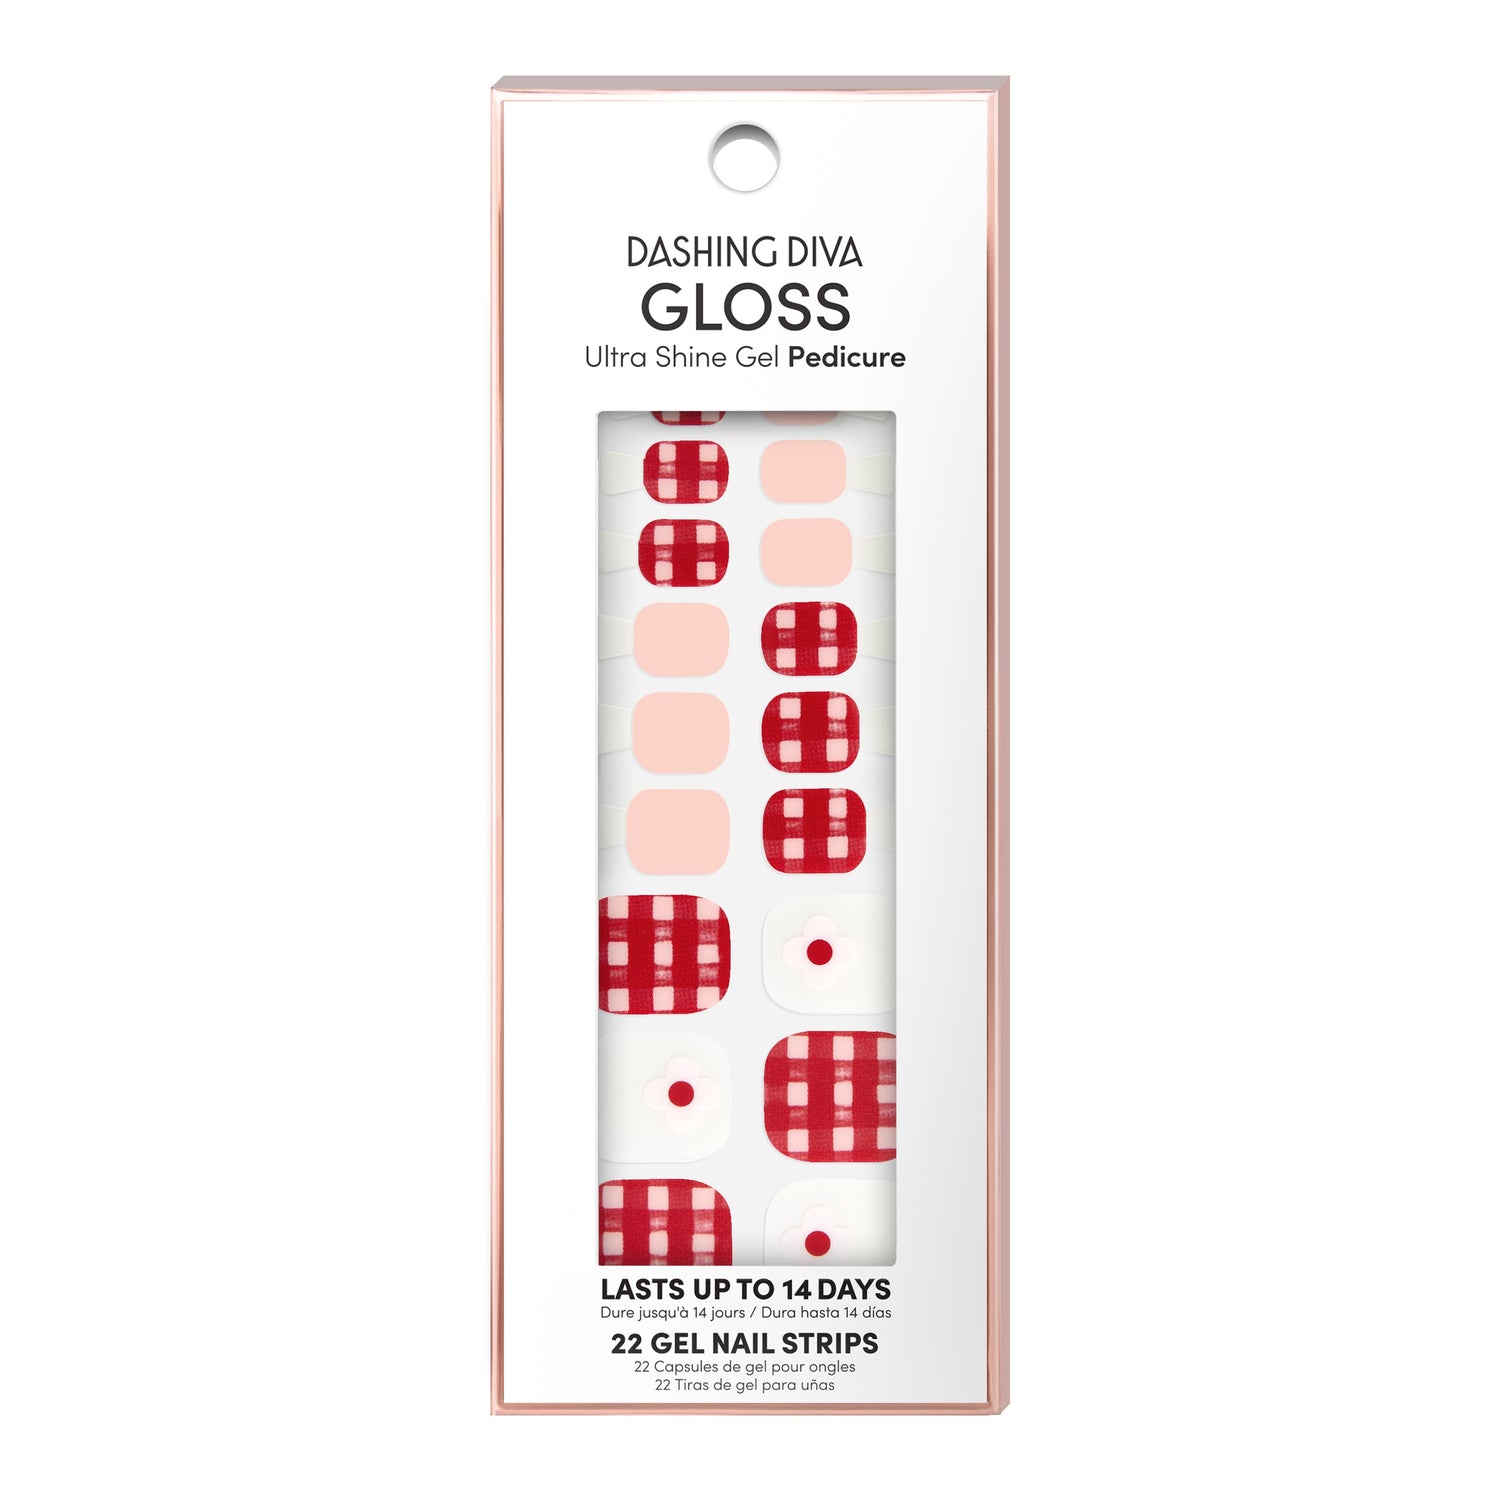 Dashing Diva GLOSS Pedicure pink and red checkered gel pedicure strips.